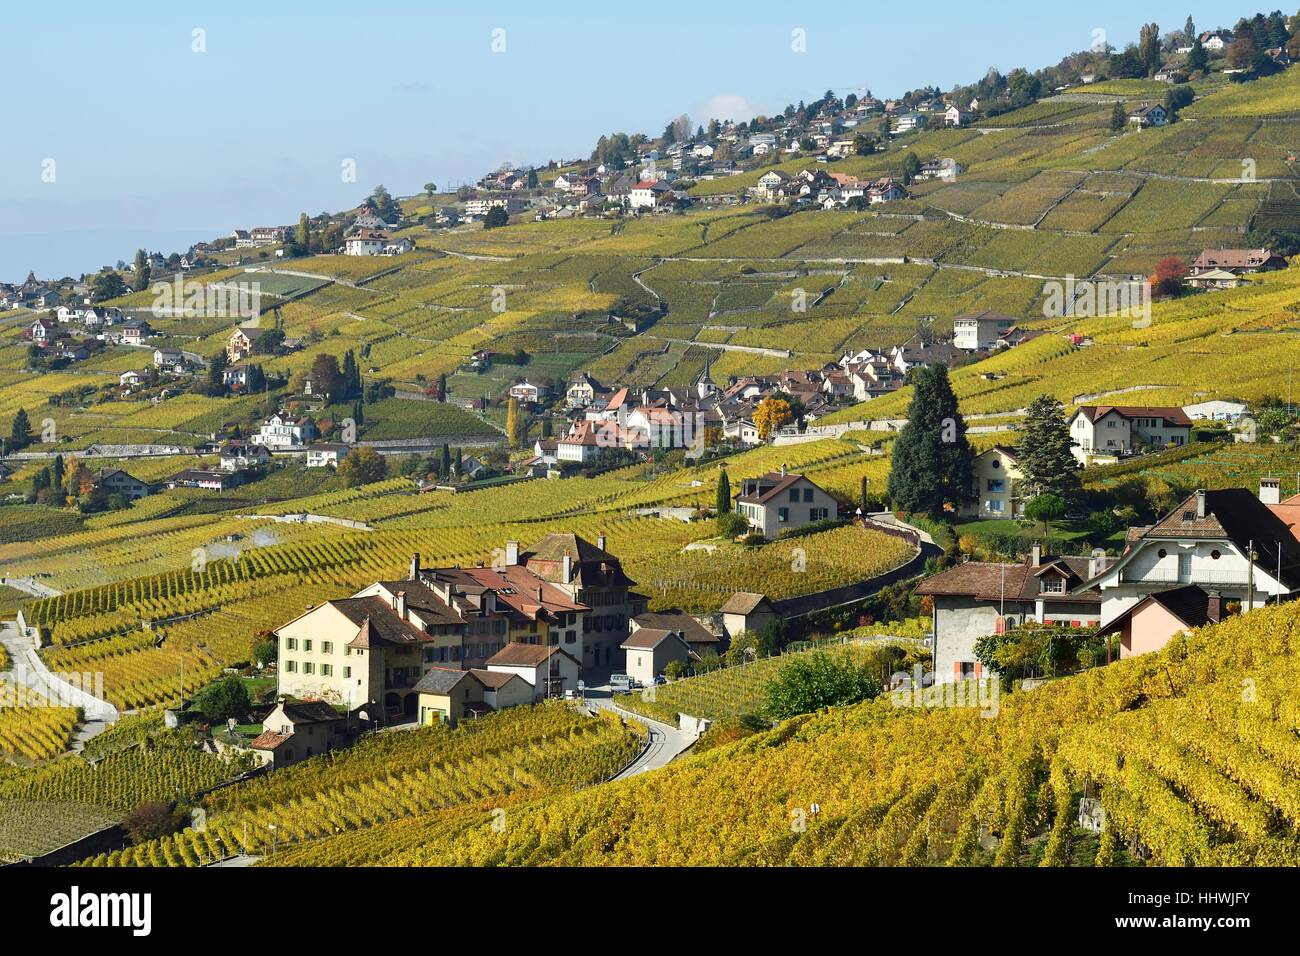 Vineyards in autumn with view of winemaking villages Epesses and Riex, Lavaux, Canton of Vaud, Switzerland Stock Photo